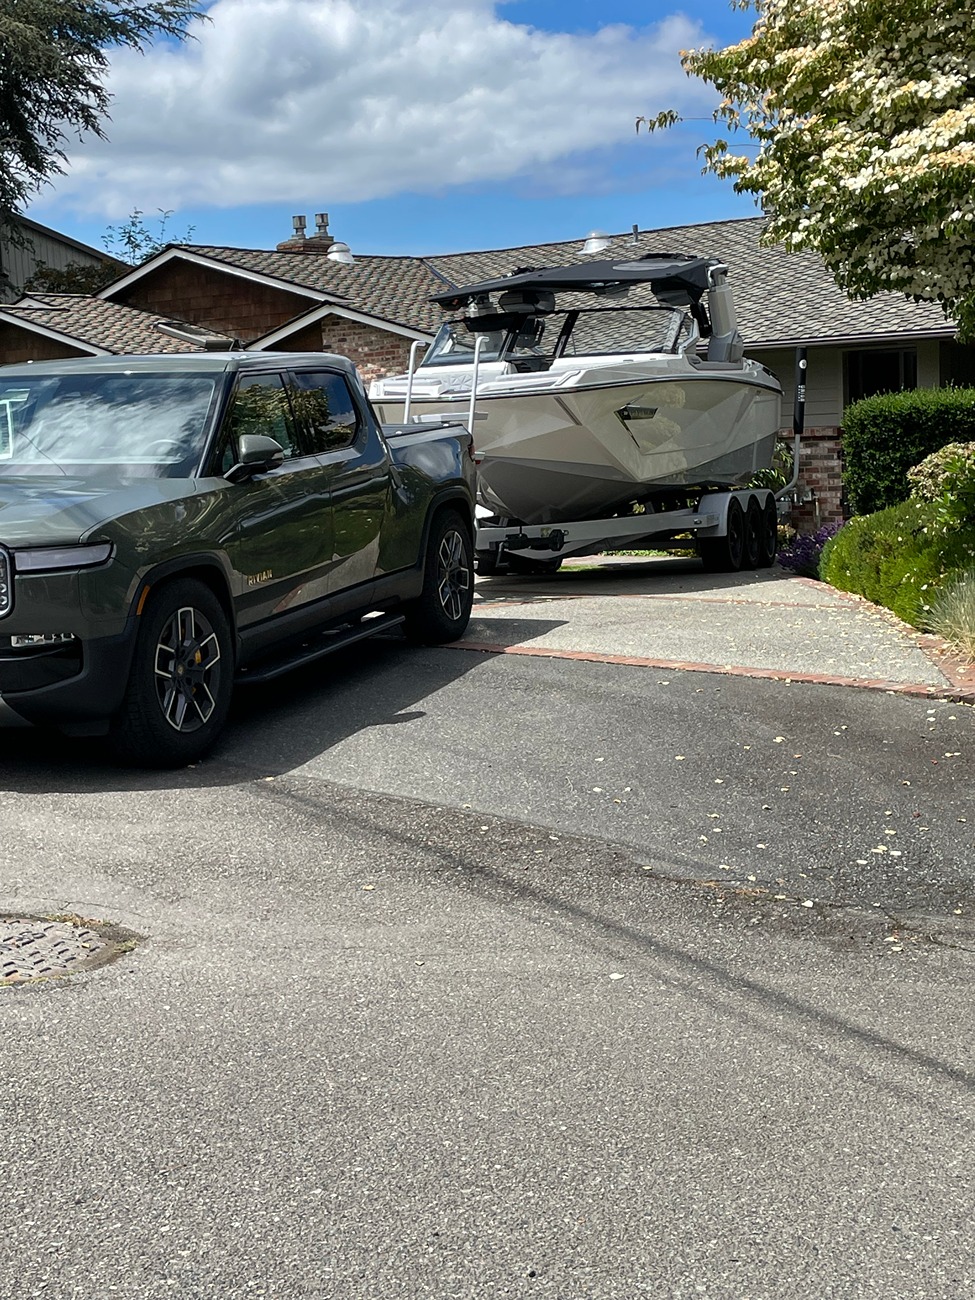 Rivian R1T R1S Towing 9000 Lb Boat and Trailer - Results IMG_1391